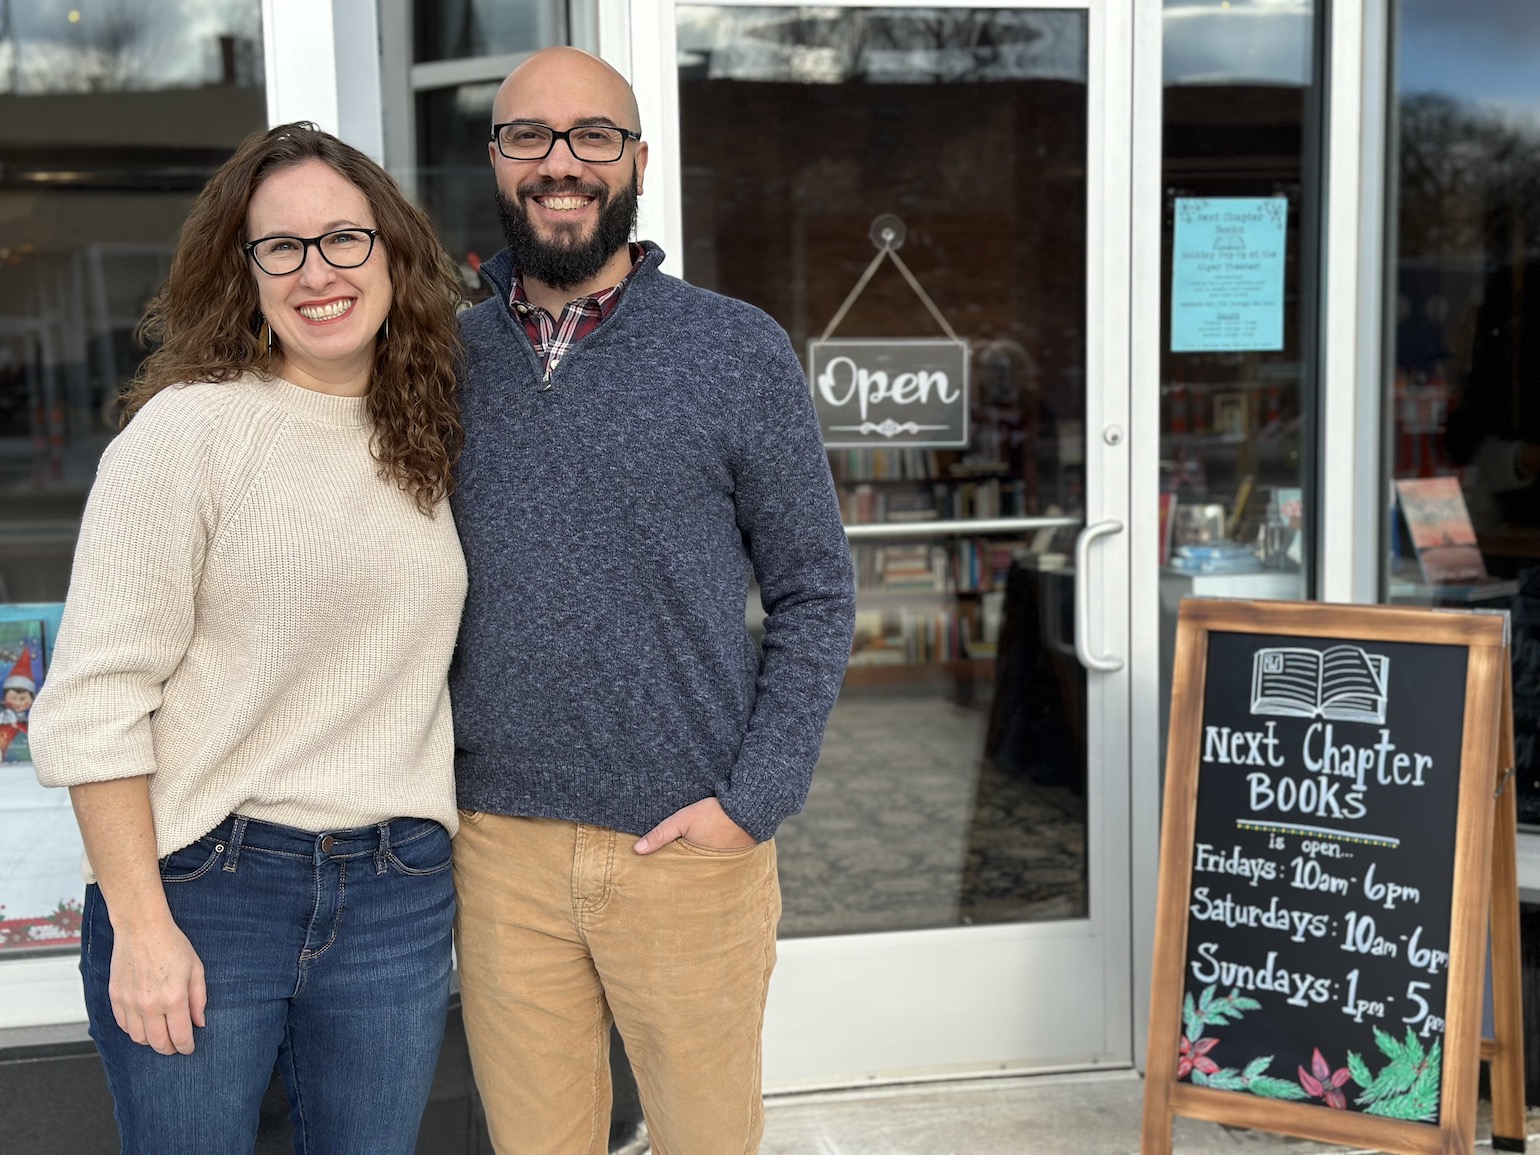 man and woman stand in front of Next Chapter Books storefront